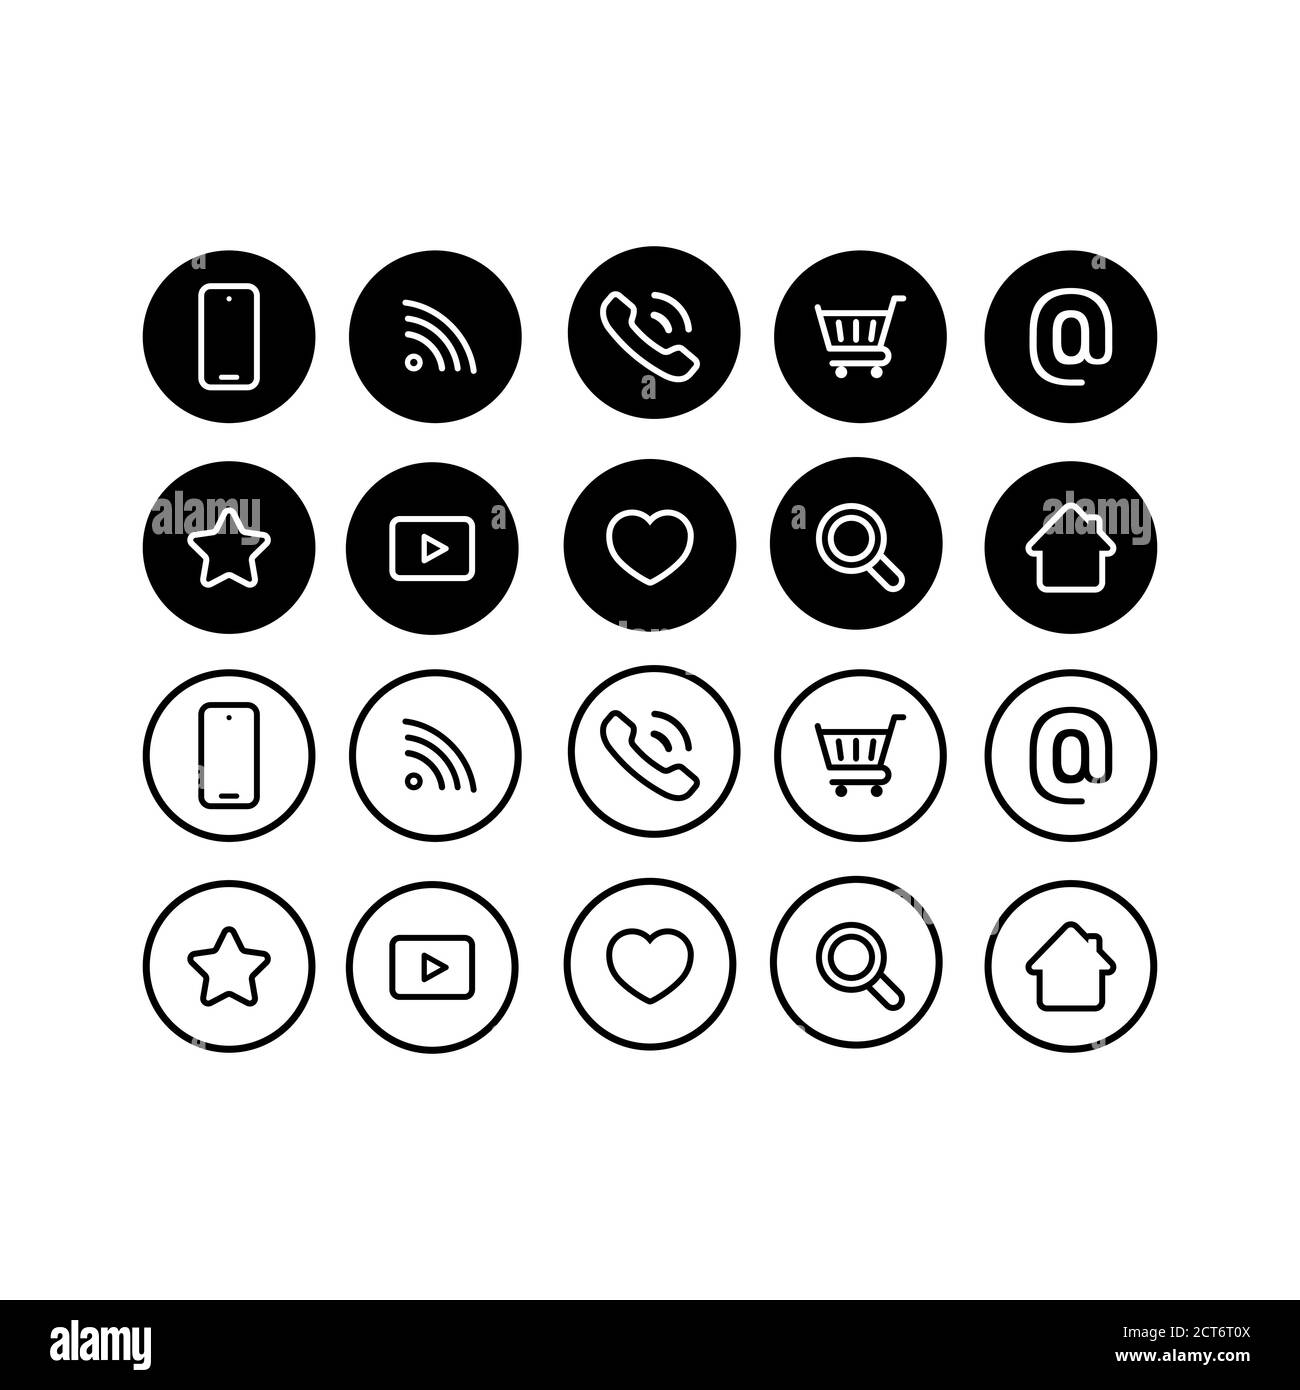 Web line icon set. Contact symbol. Communication sign. Social network icon. Phone, Mobile, Film, Mail, TV Internet, Home Heart. Perfect for web pages, Stock Vector